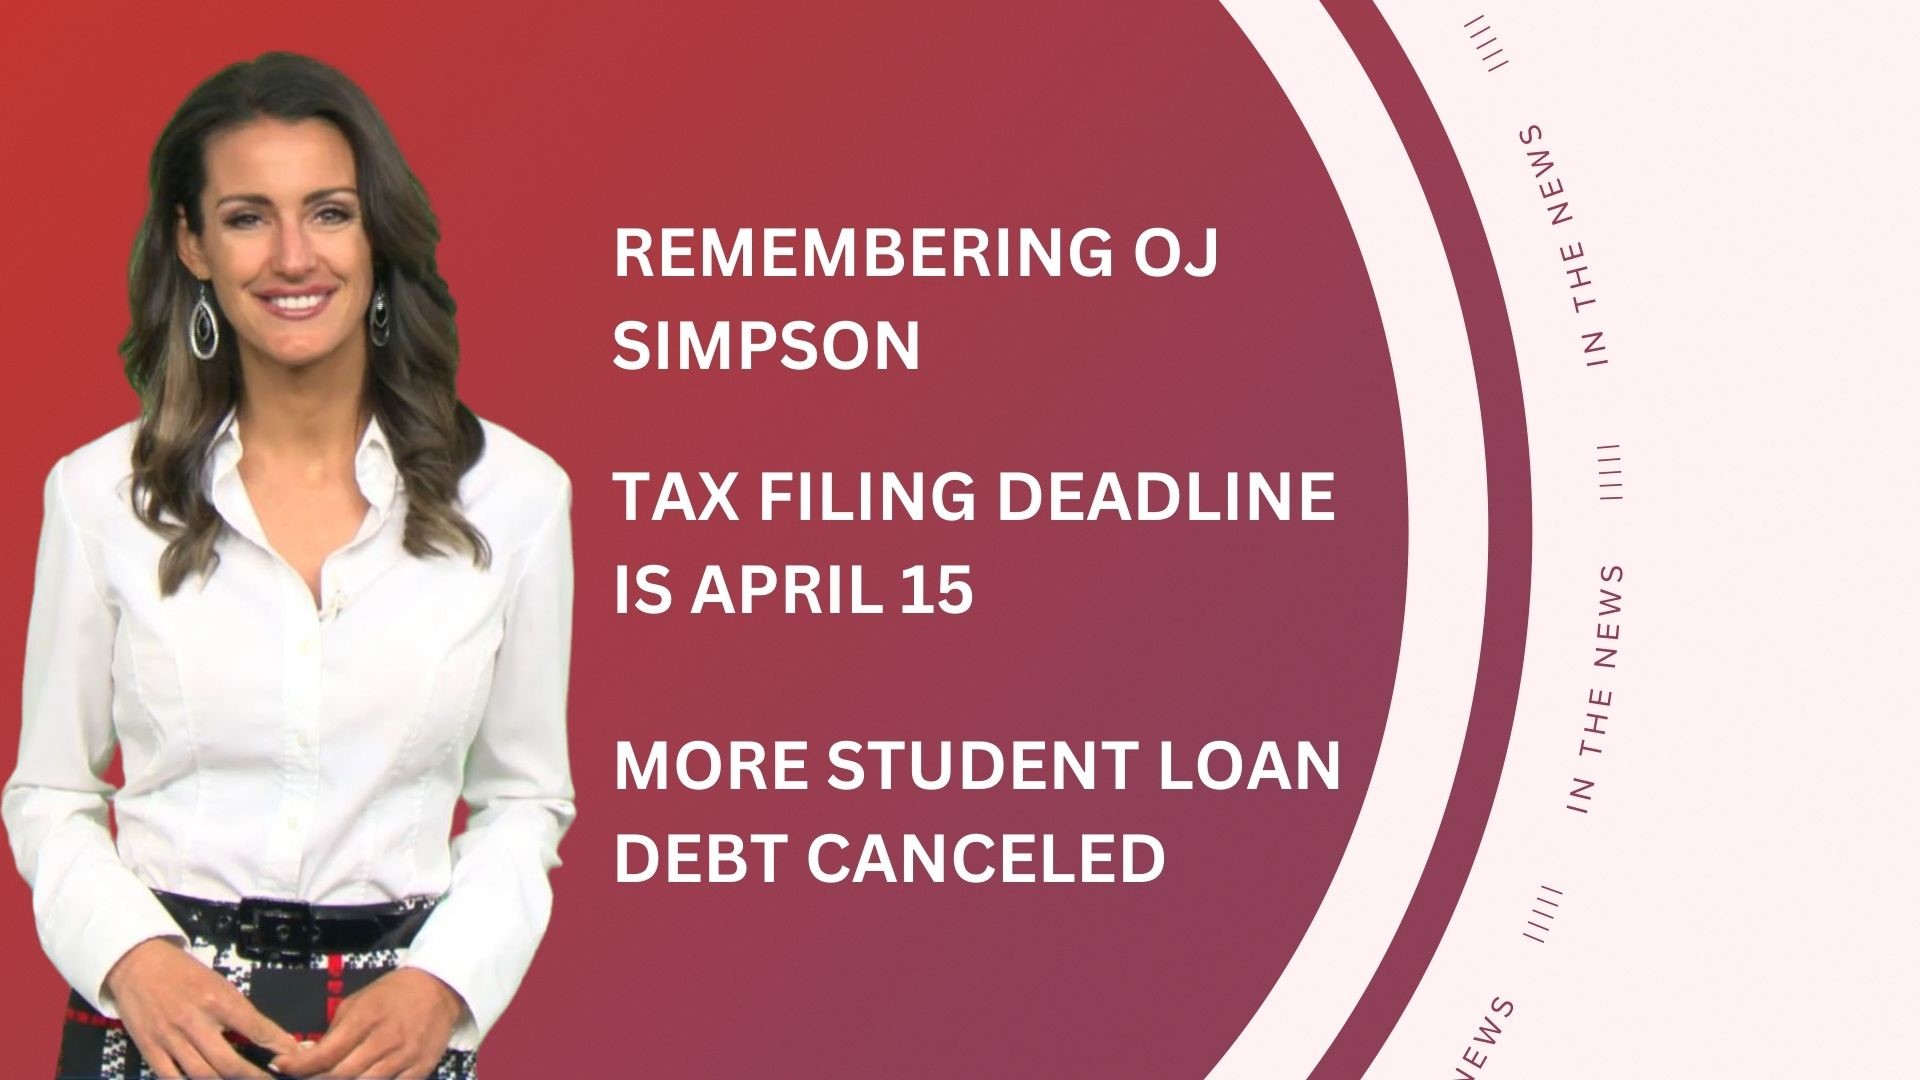 A look at what is happening in the news from remembering OJ Simpson following his death at 76 to more student loan debt canceled and new shows from Harry and Meghan.